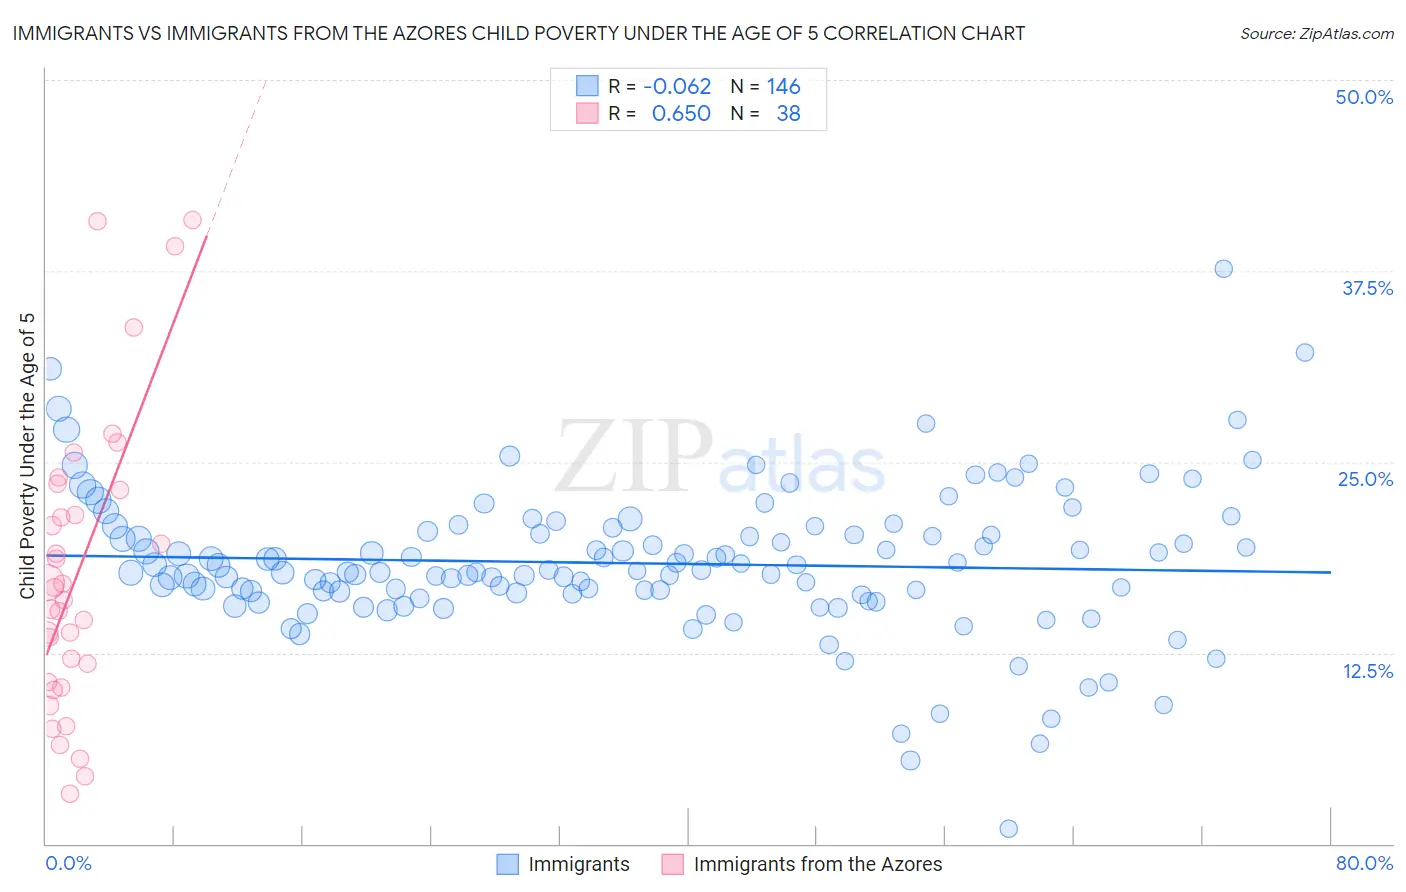 Immigrants vs Immigrants from the Azores Child Poverty Under the Age of 5